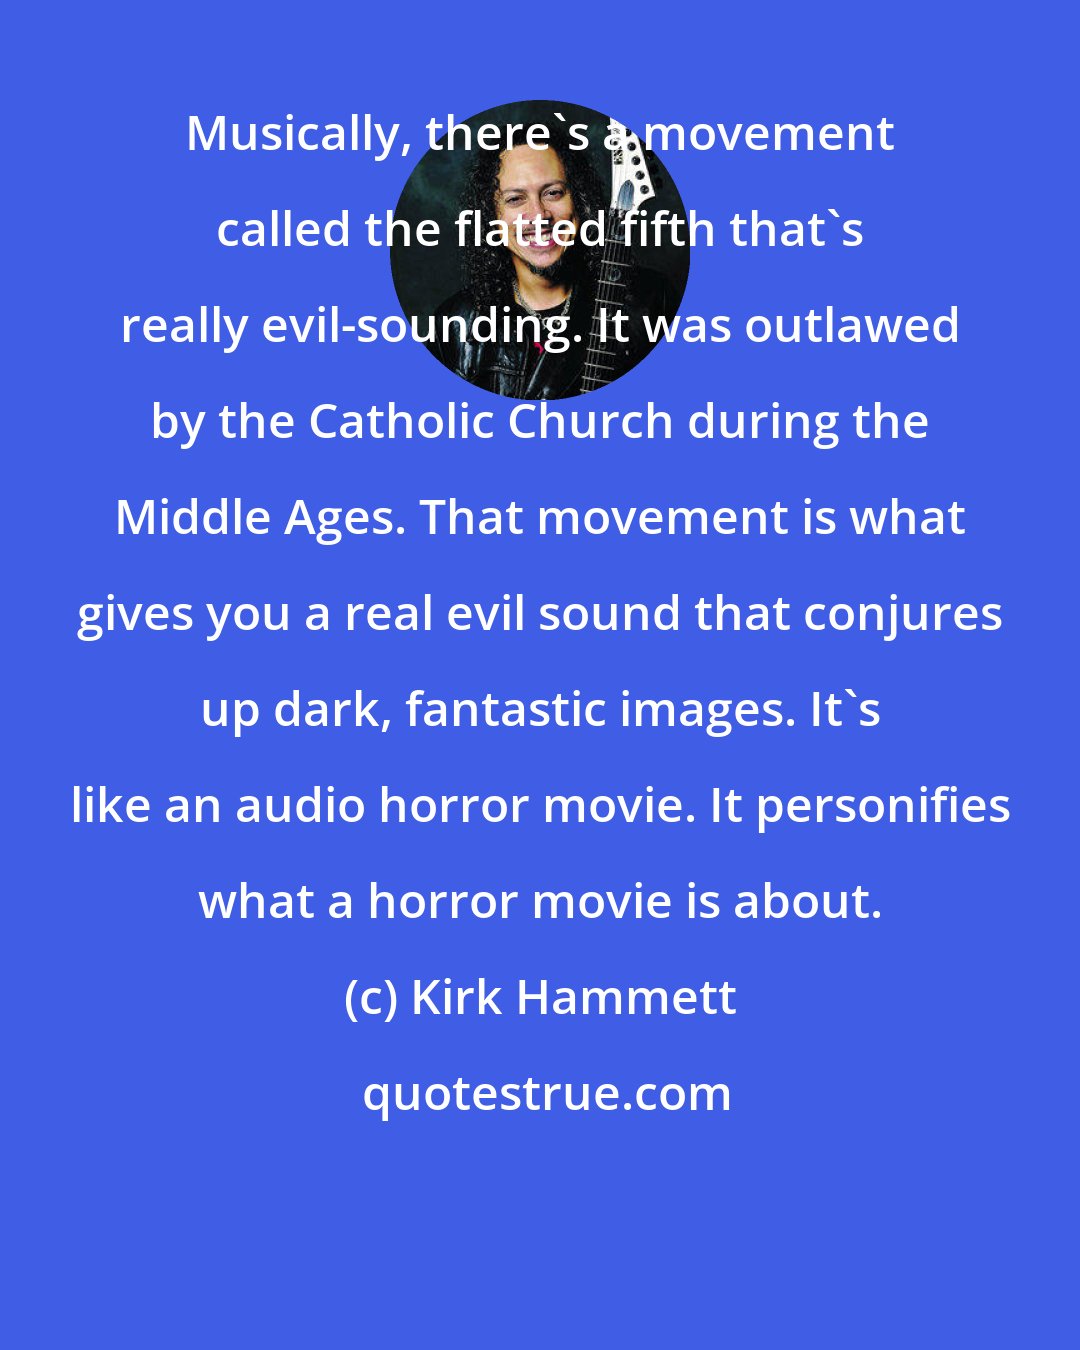 Kirk Hammett: Musically, there's a movement called the flatted fifth that's really evil-sounding. It was outlawed by the Catholic Church during the Middle Ages. That movement is what gives you a real evil sound that conjures up dark, fantastic images. It's like an audio horror movie. It personifies what a horror movie is about.